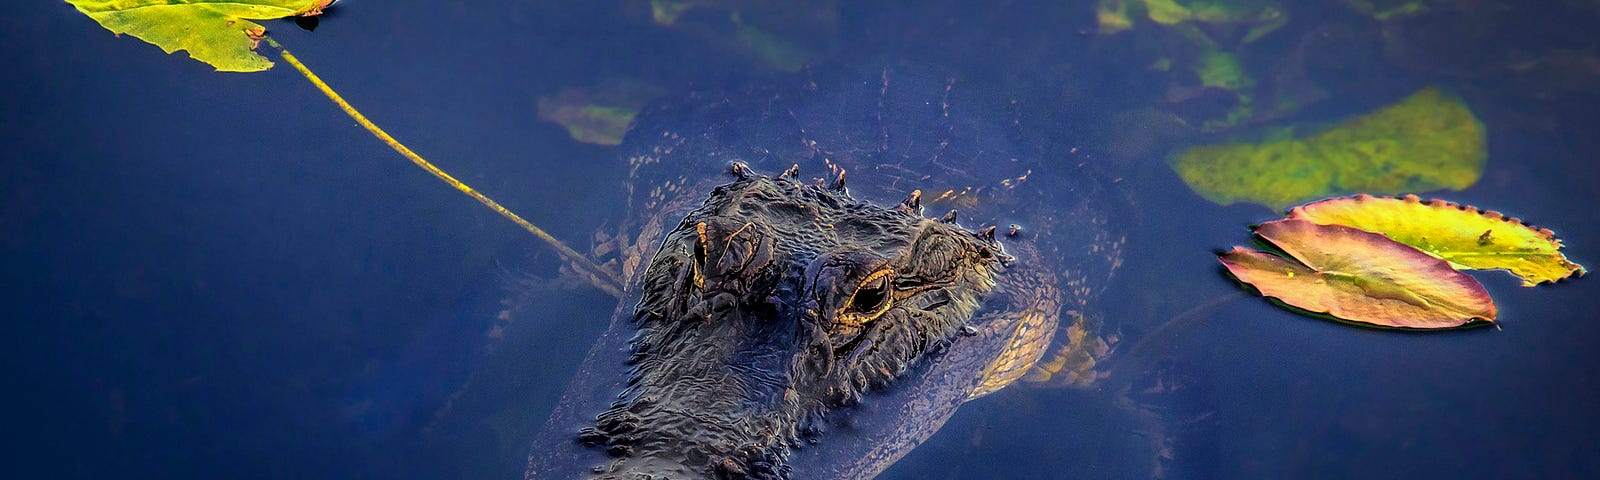 An alligator peeking their nose out of the water.